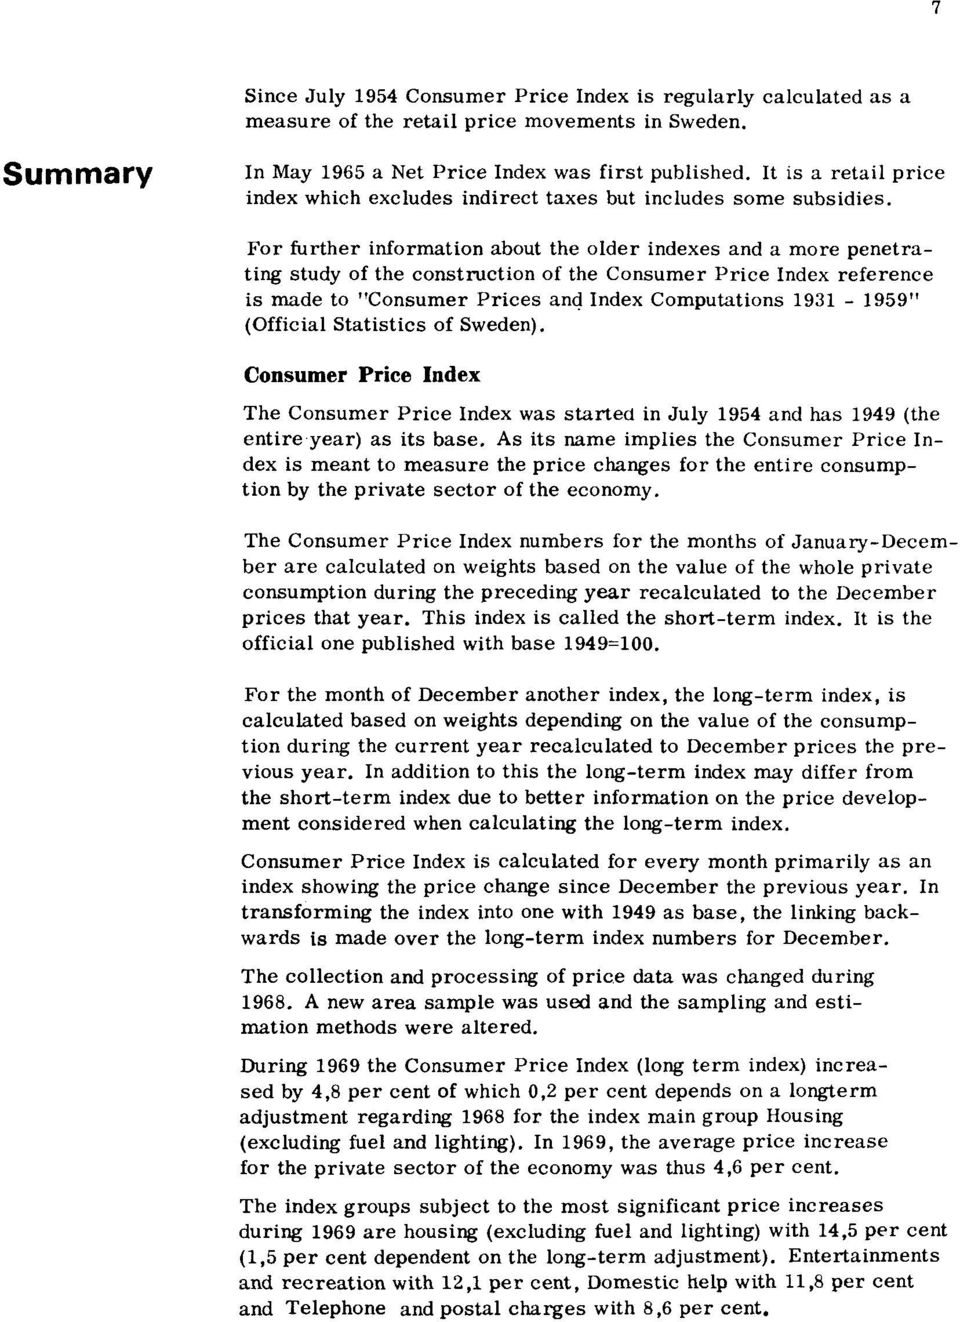 For further information about the older indexes and a more penetrating study of the construction of the Consumer Price Index reference is made to "Consumer Prices and Index Computations 1931-1959"